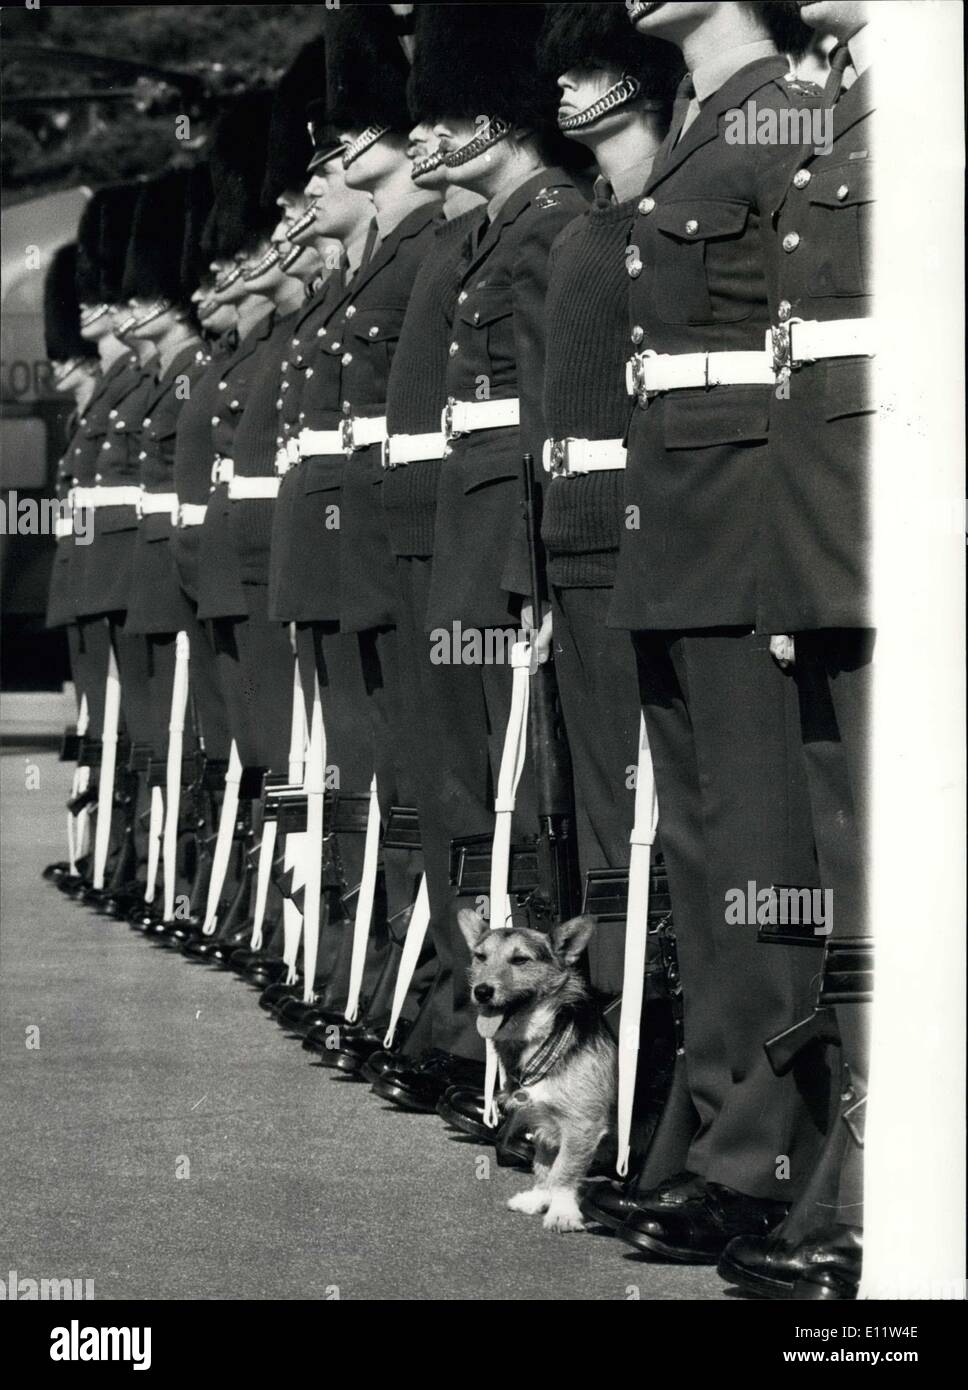 Apr. 09, 1980 - The Welsh Guards Parade To Say Farewell To Rats:' At Elizabeth Barracks, Pirbright Camp. Brookwood' Workling  today the 1st Battalion Welsh Guards were on Parade  farewell to rats the Crashed (Corgie/Terrier) who has been retired on Yesterday advice, Rats us thought to be 12 years old and much of his has been spent with the recruitment Companies in Crossmagien South Armagh, Northern Ireland in December last year he was awarded the Pro dogs Gold medal for the Dog most Devoted to Duty and was given to return to London for the presentation Stock Photo